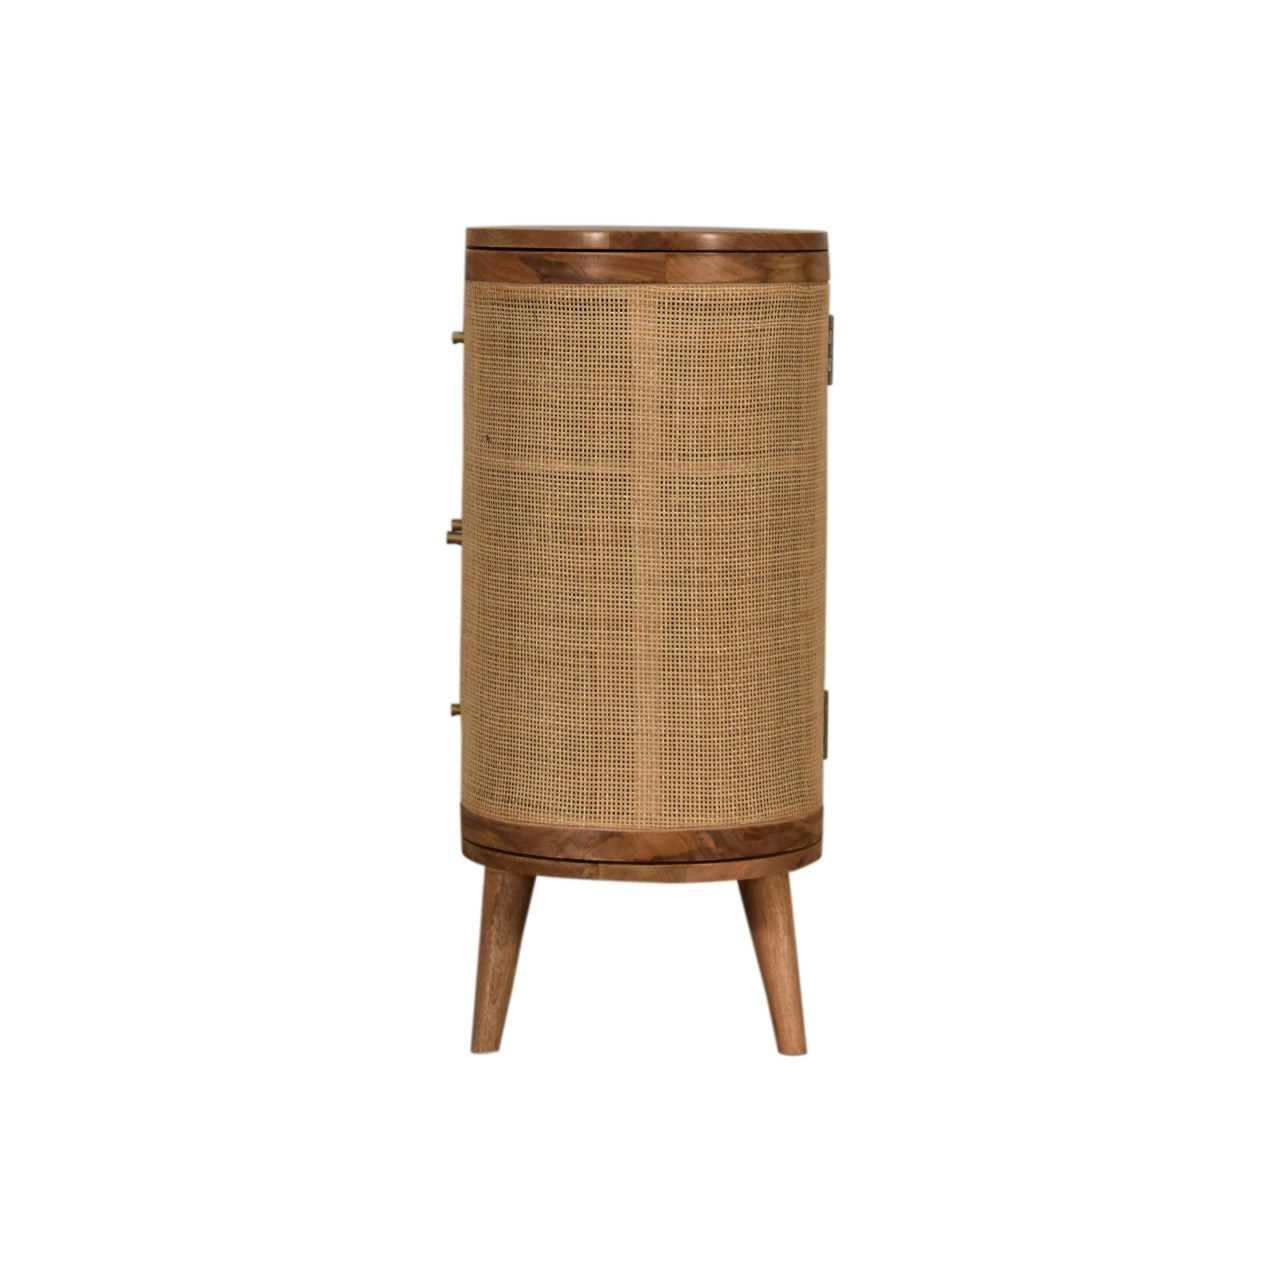 Woven Rattan 3 Drawer Cabinet Solid Wood In Oak Finish